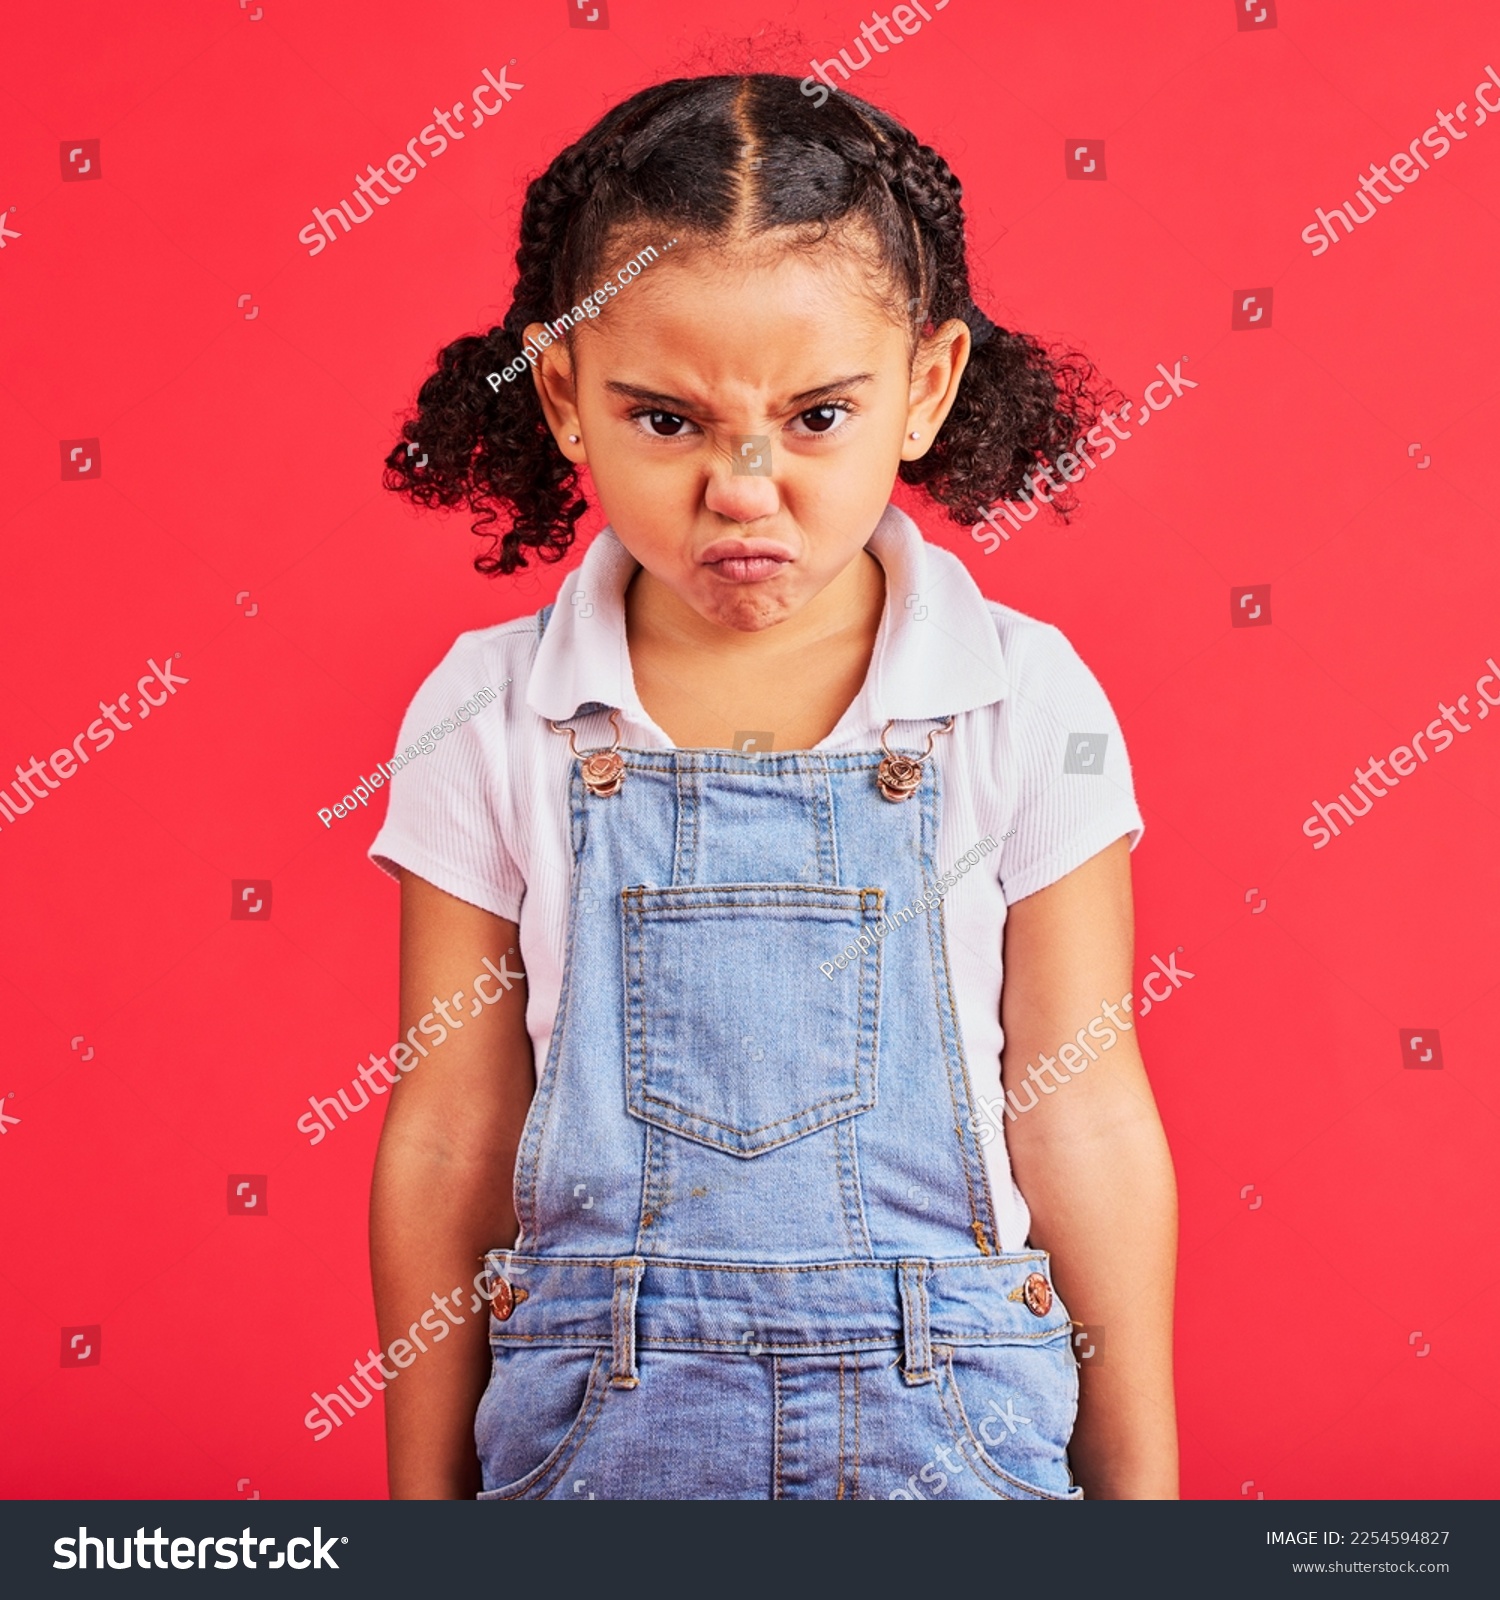 Child, portrait or angry face on isolated red background in emoji tantrum, behavior or stubborn studio problem. Mad, annoyed or frustrated little girl and sulking, grumpy or anger facial expression #2254594827